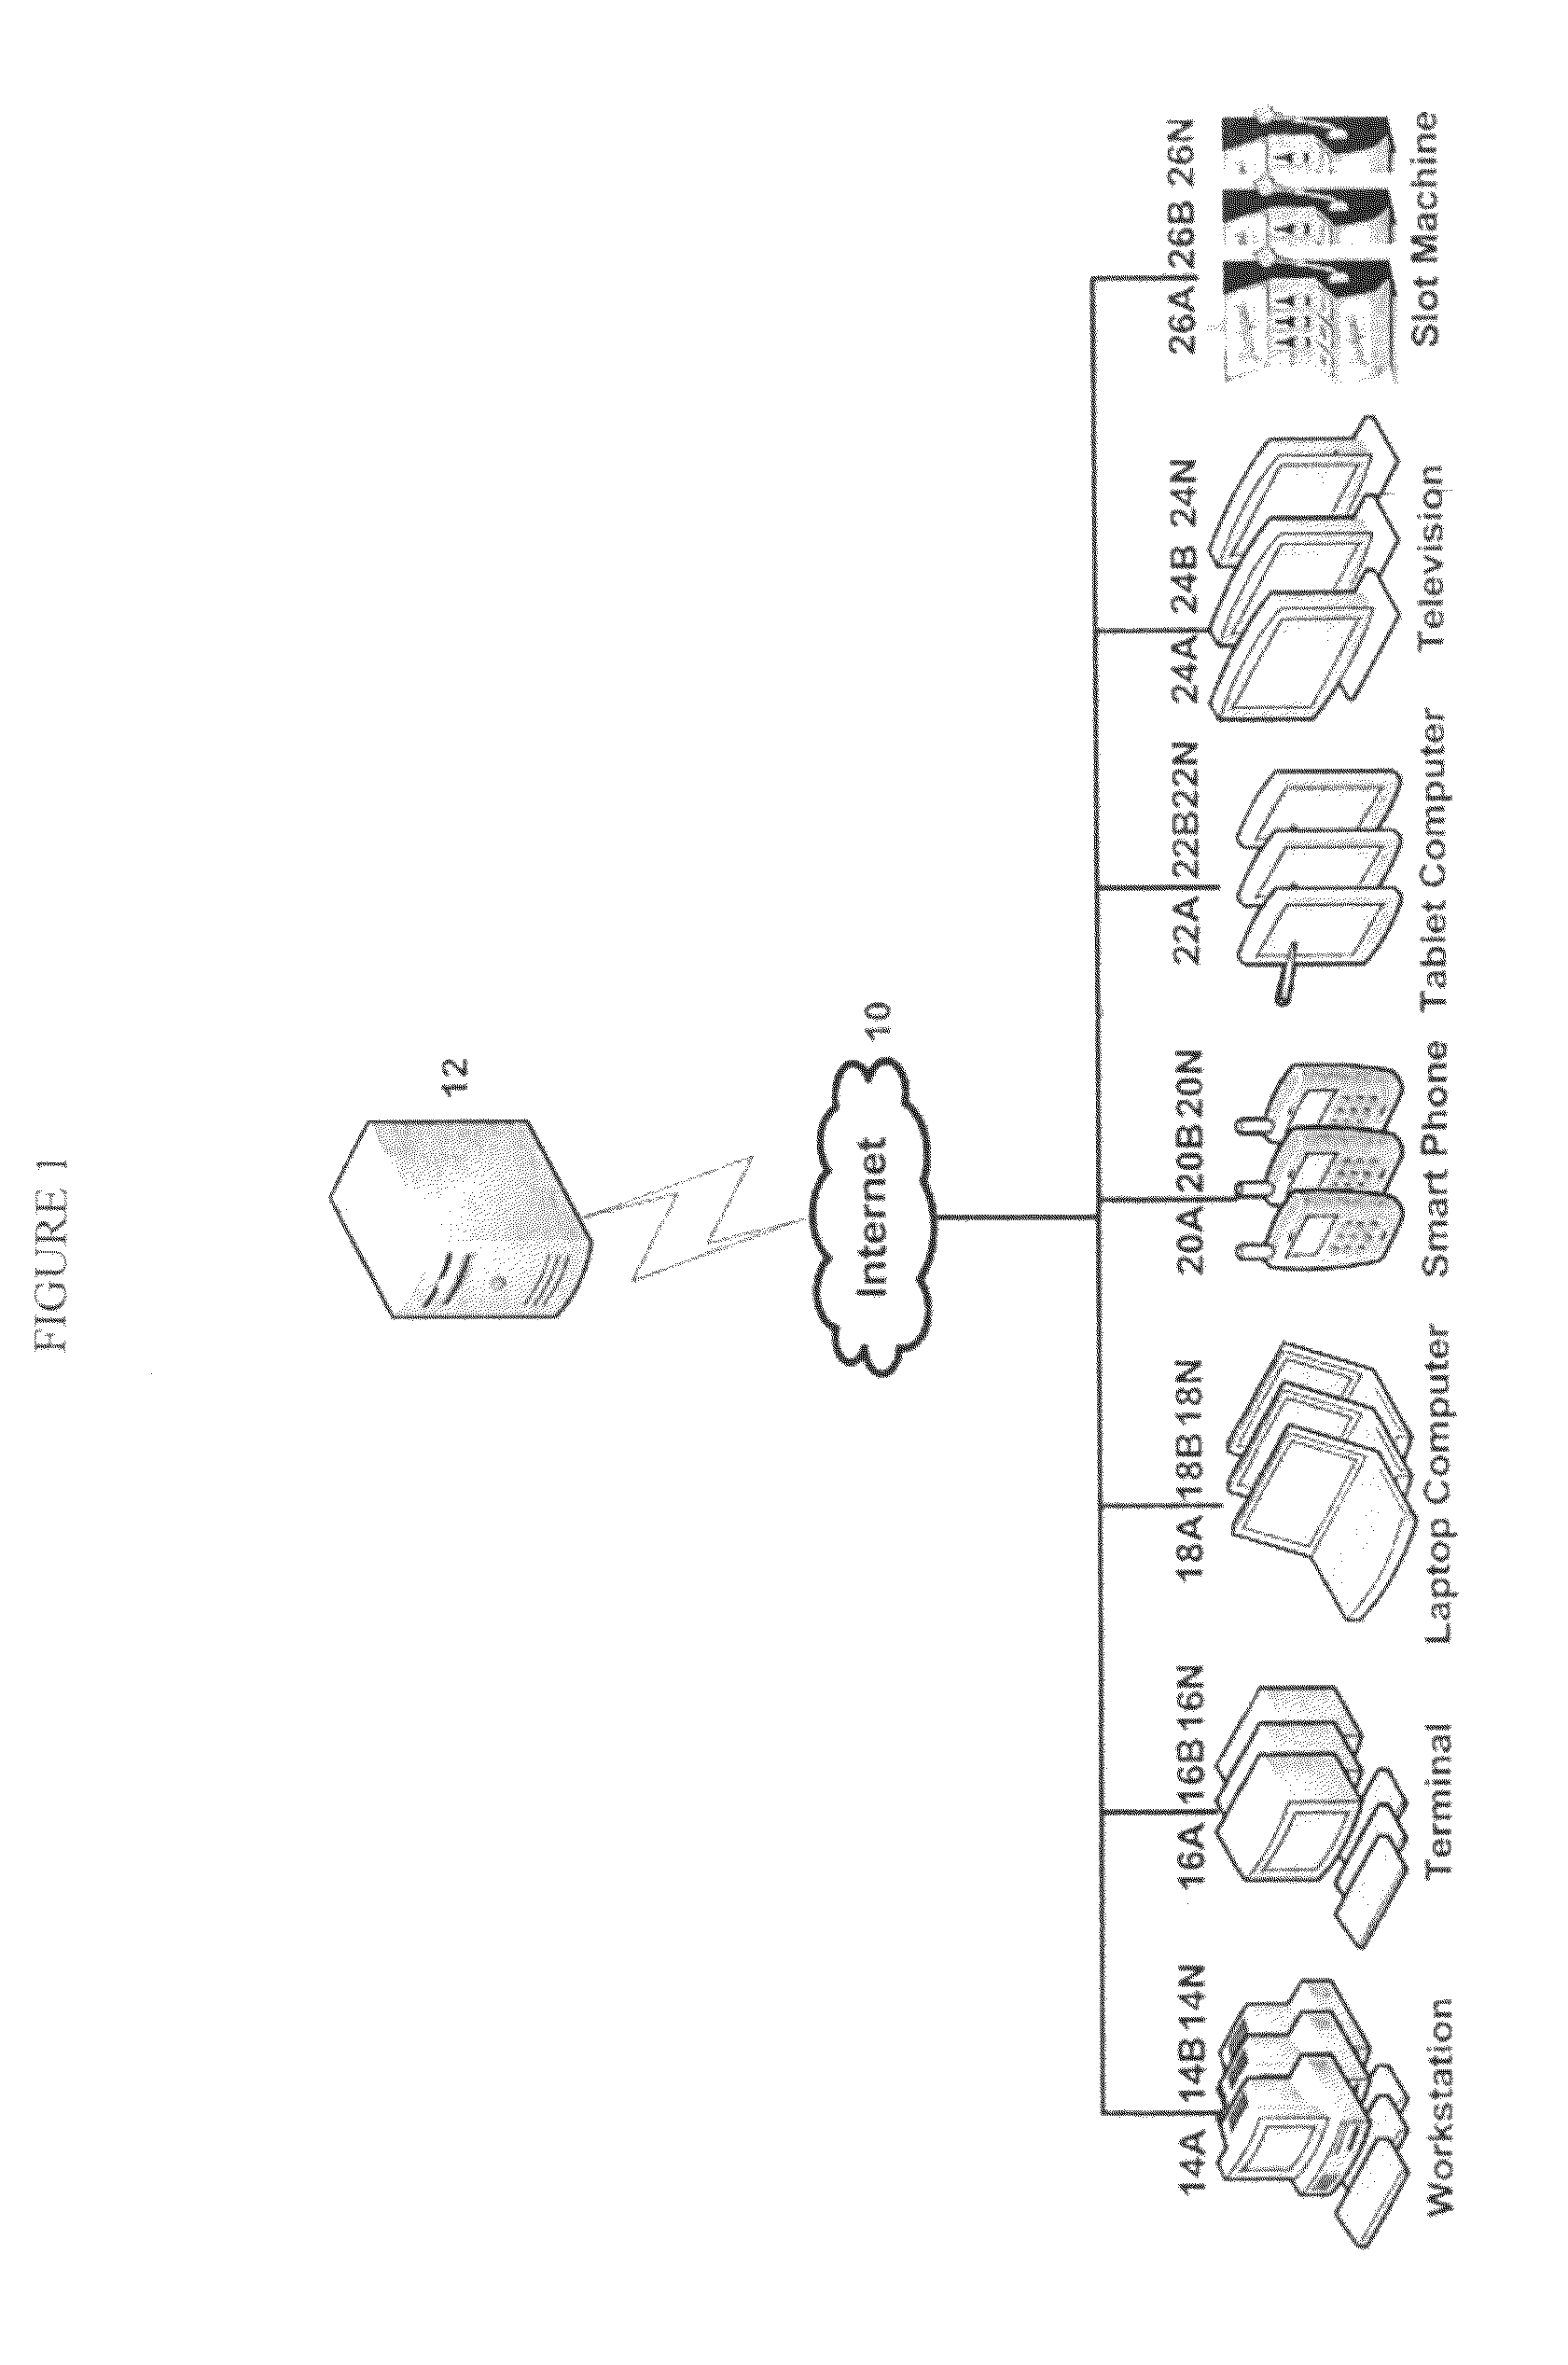 Pool wagering apparatus, methods and systems